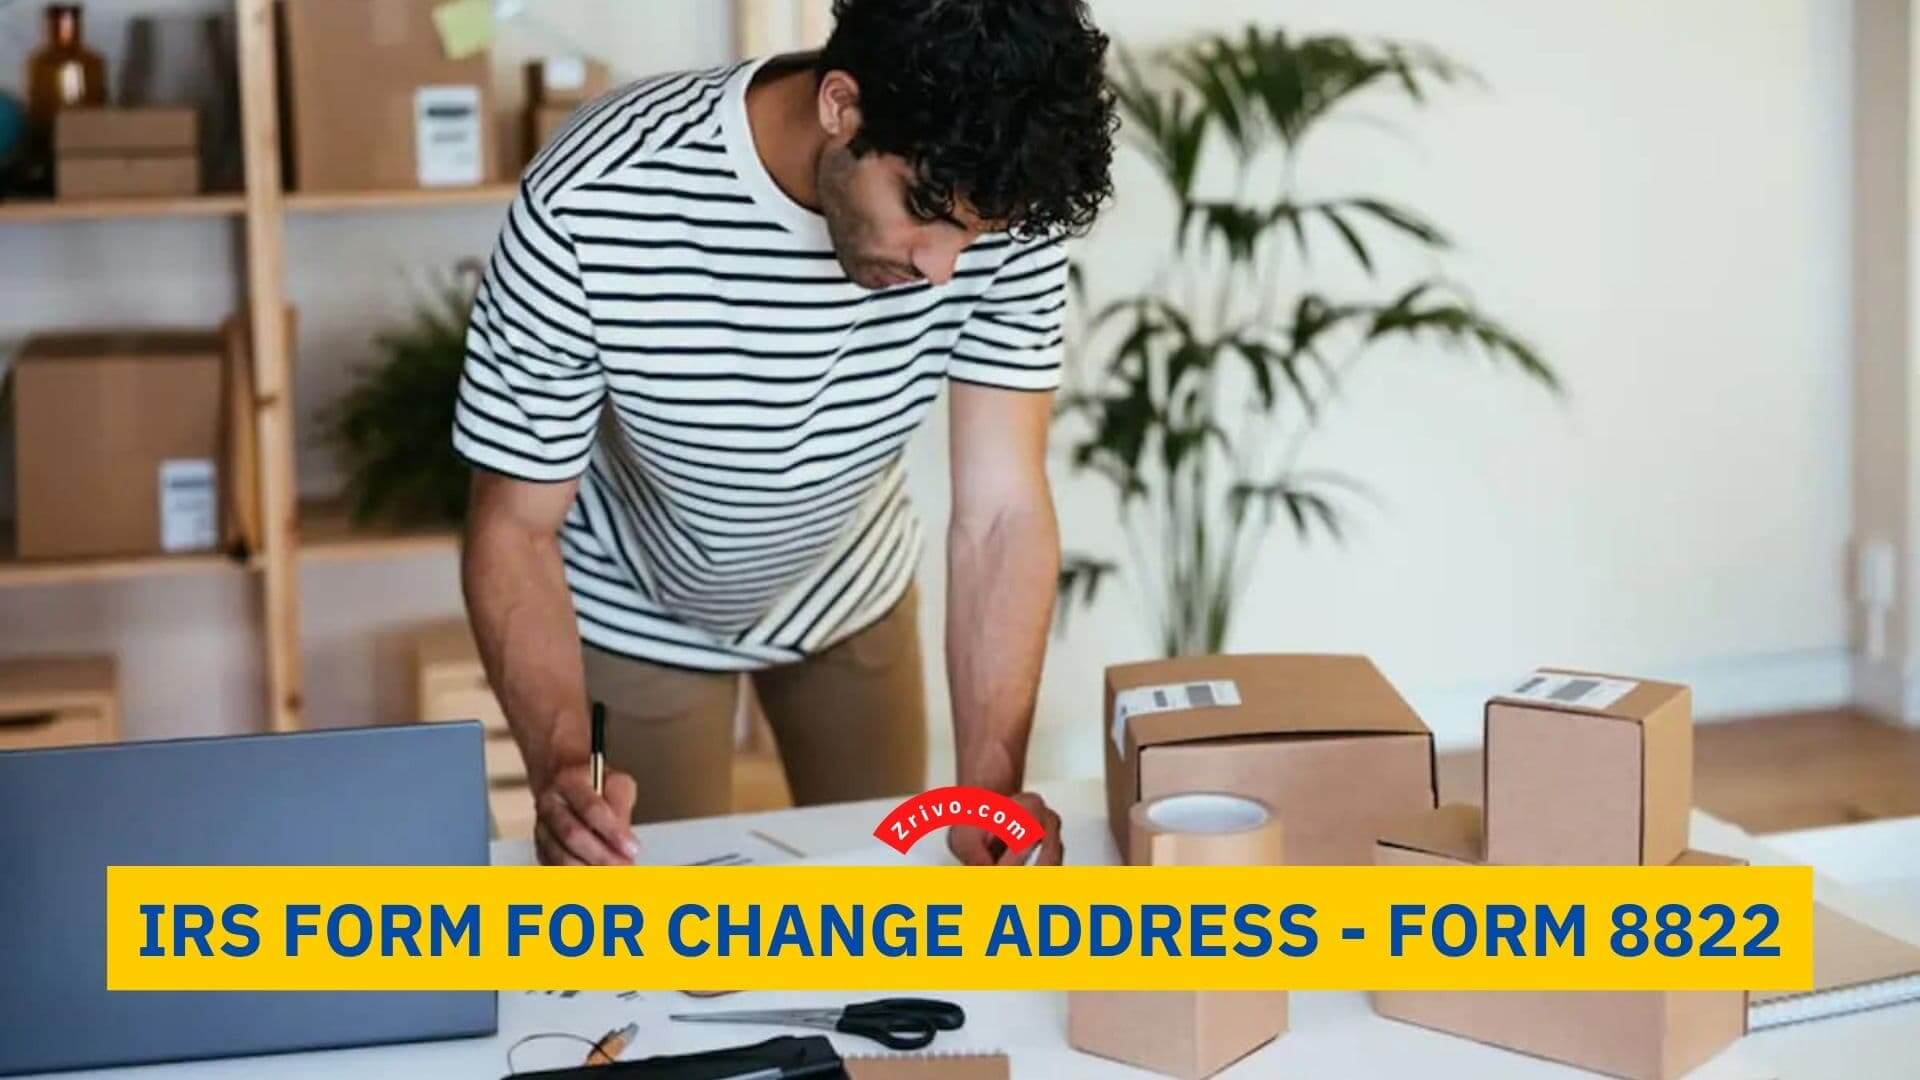 IRS Form for Change Address - Form 8822